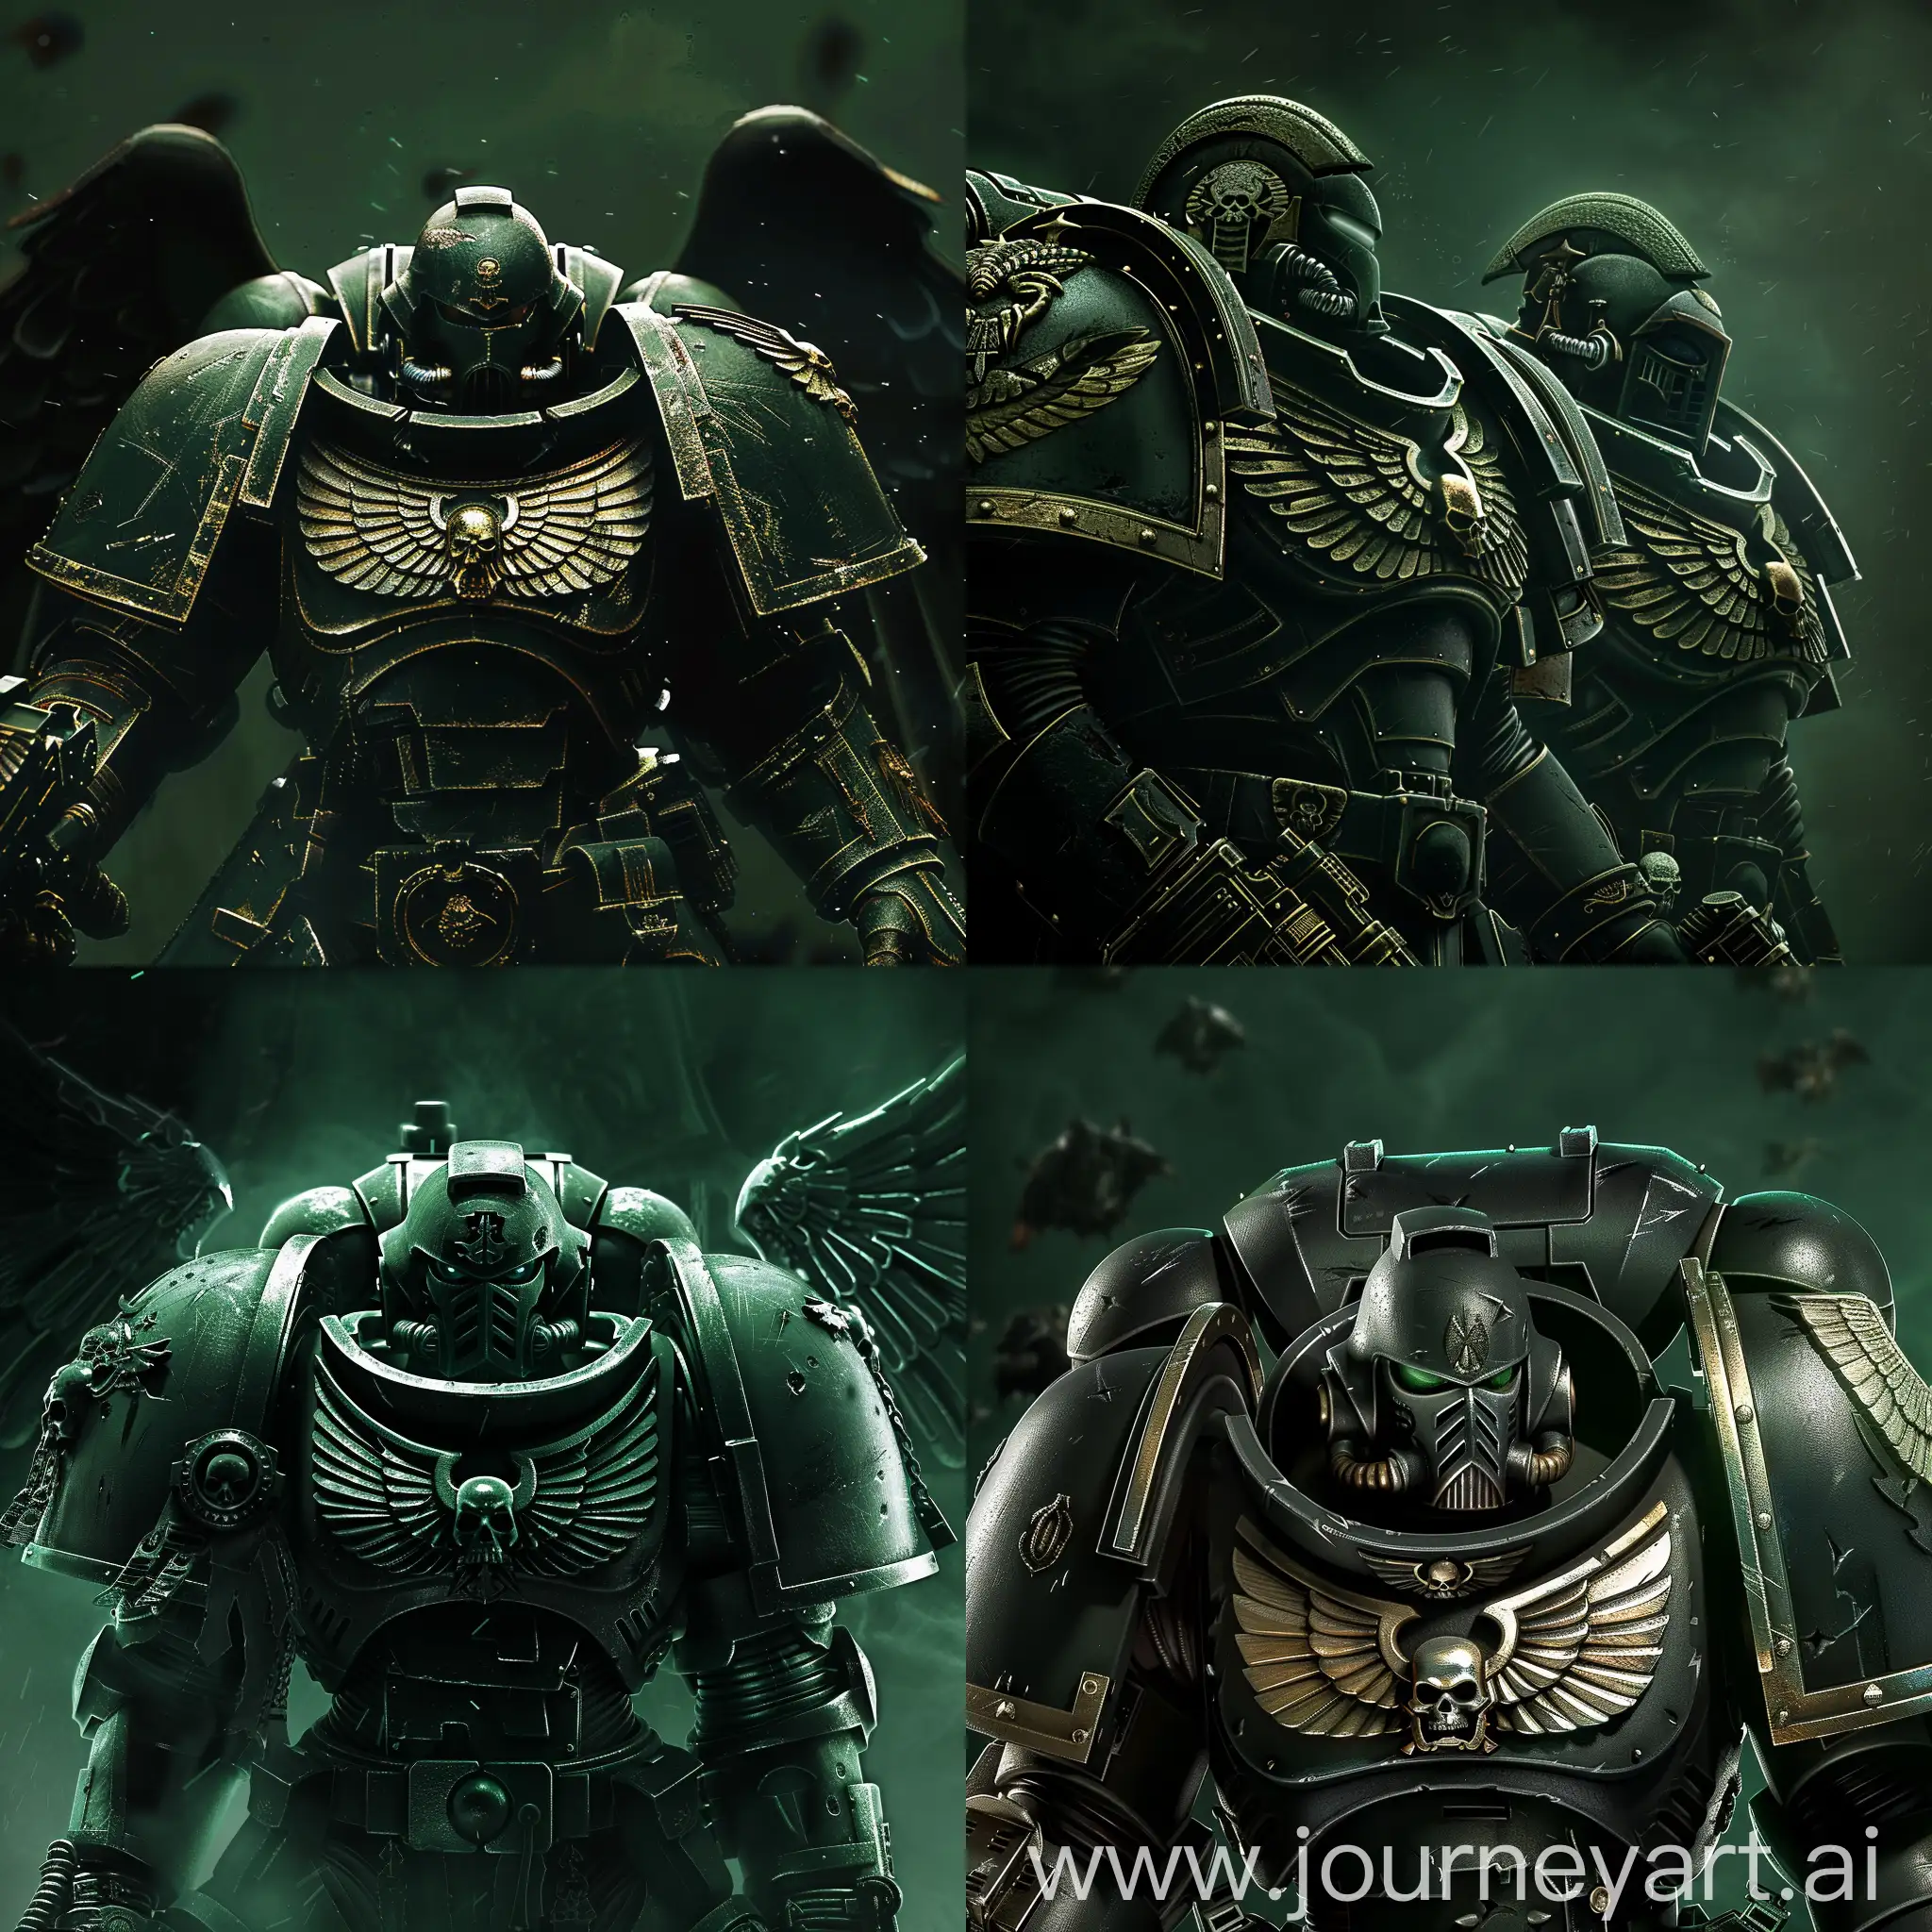 The Dark Angels from the Warhammer 40k universe. The background is dark green. 